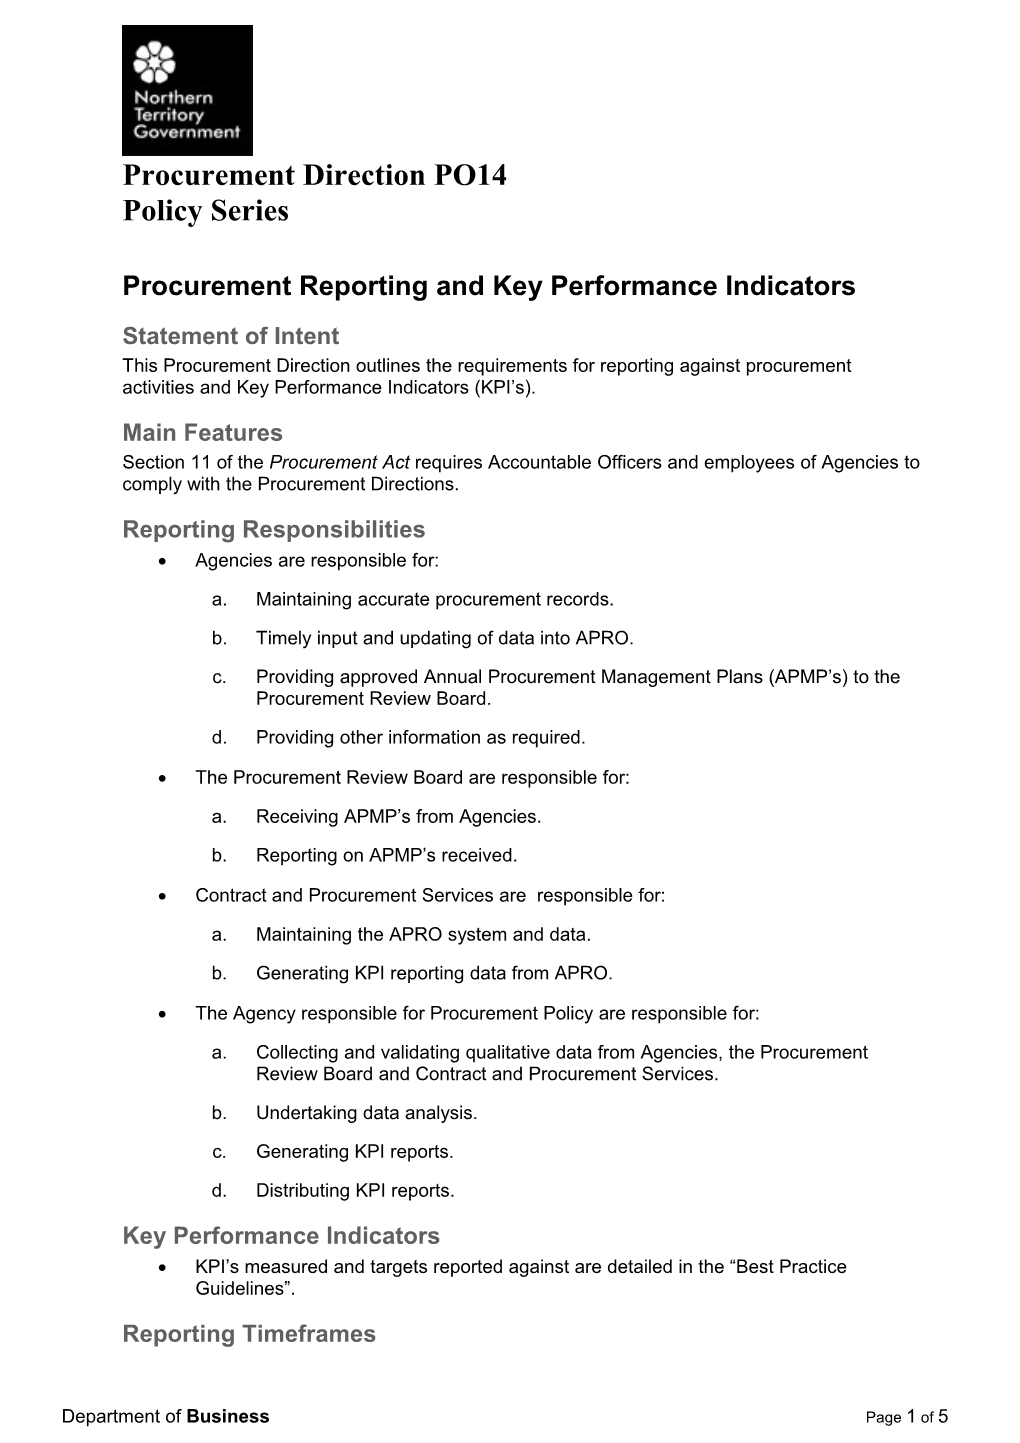 Procurement Reporting and Kpis - PO14 (18 April 2016)